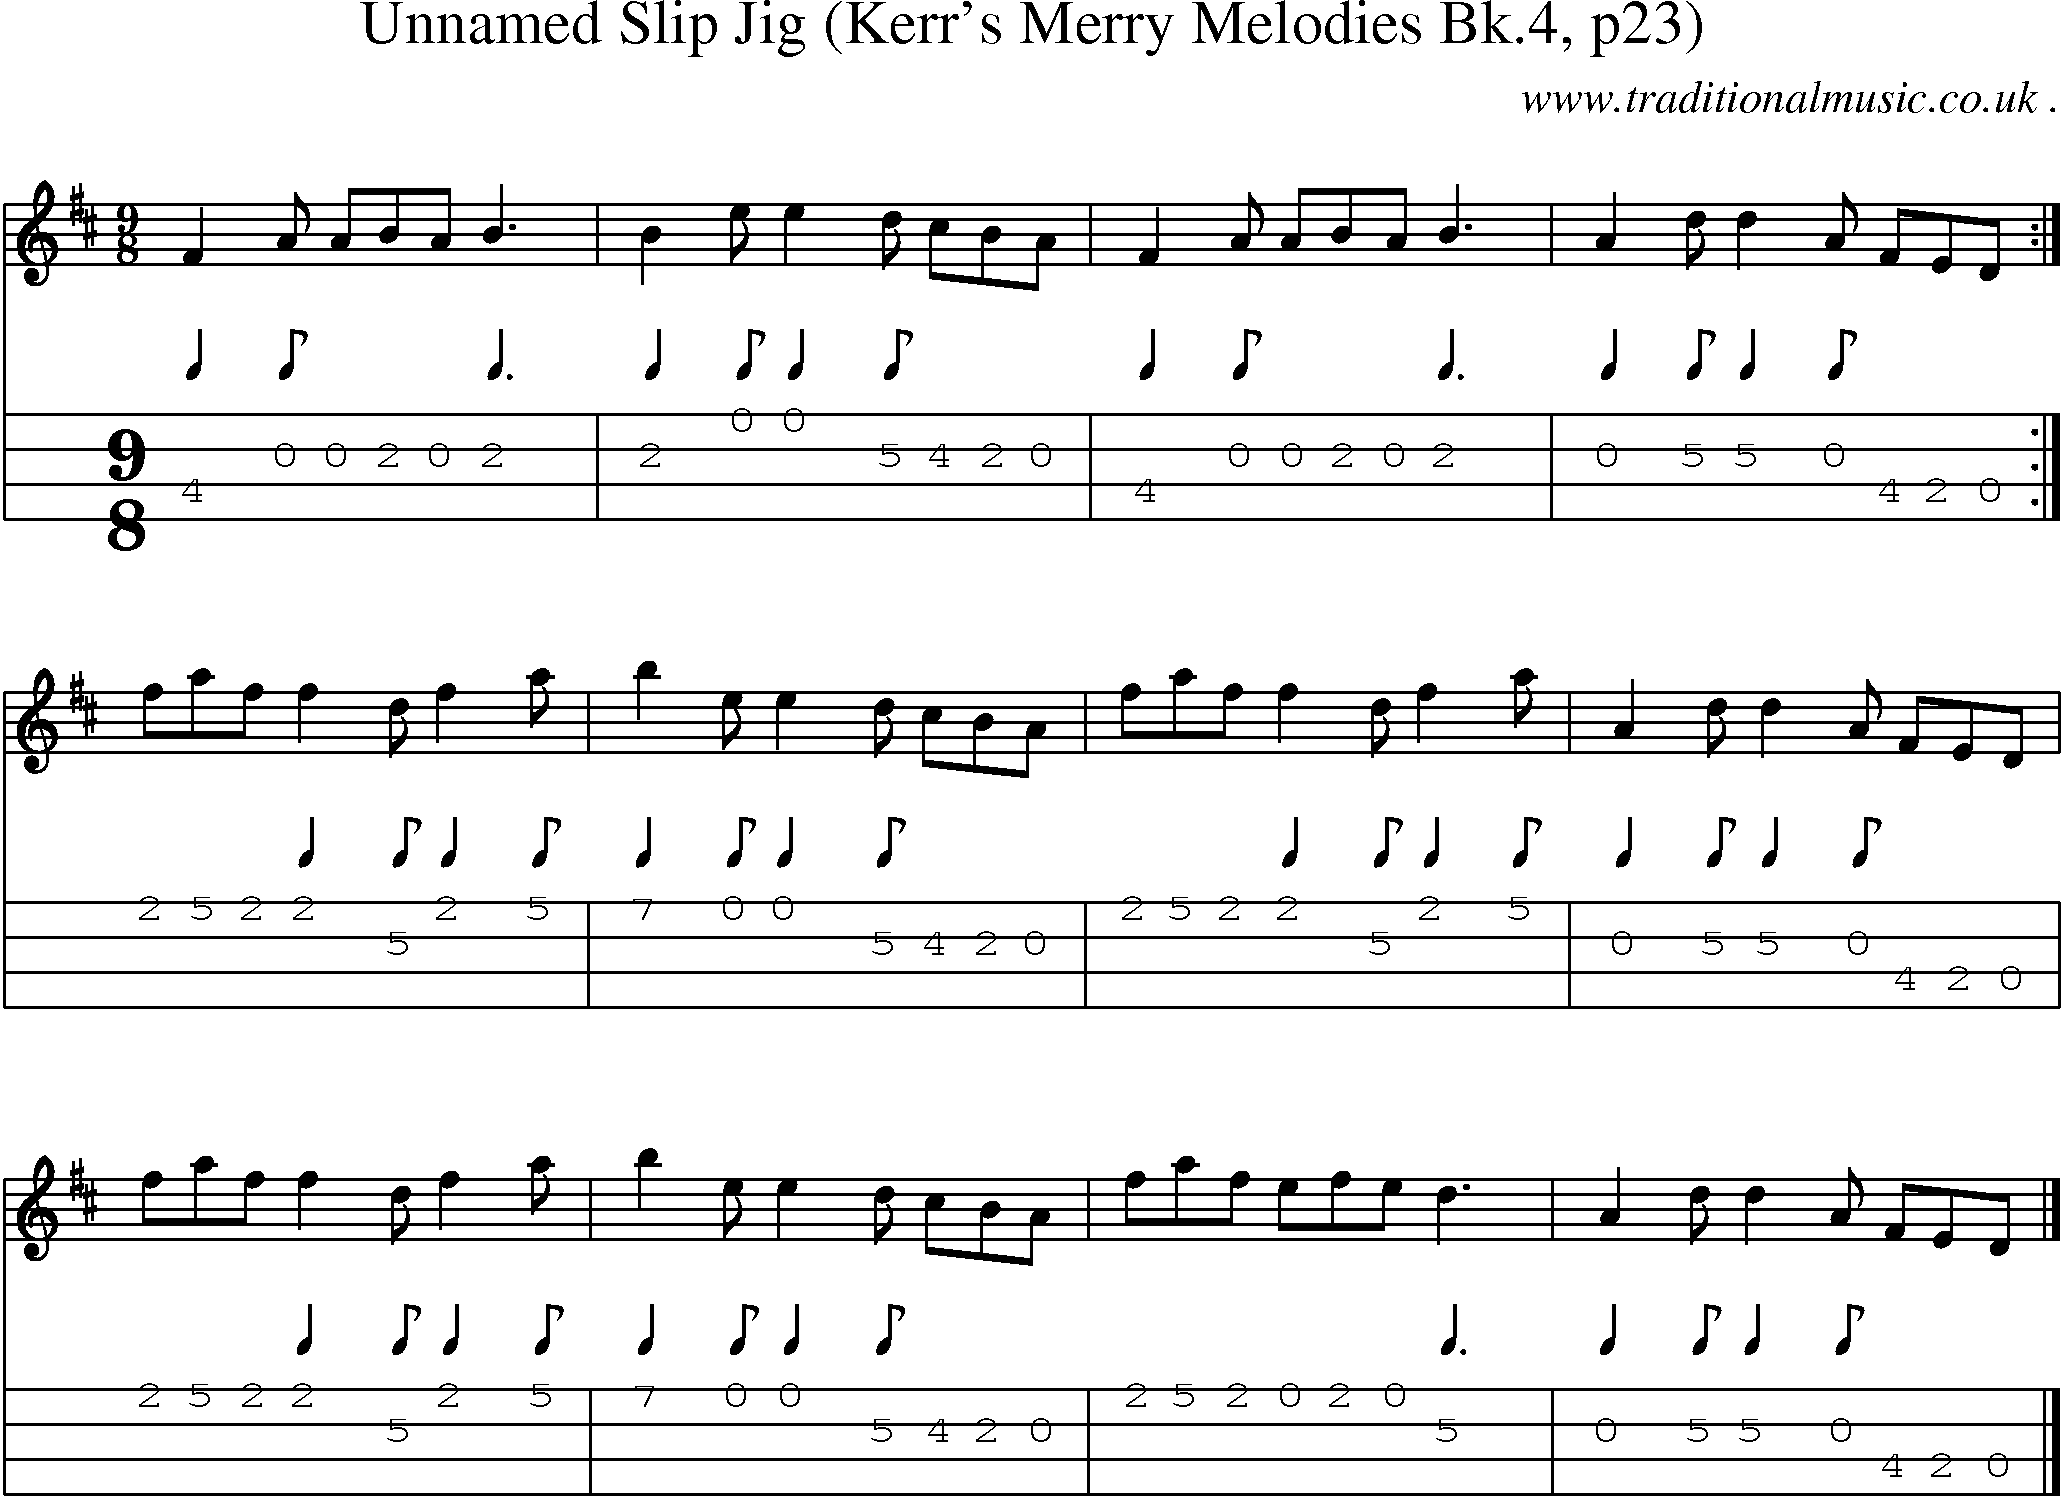 Sheet-music  score, Chords and Mandolin Tabs for Unnamed Slip Jig Kerrs Merry Melodies Bk4 P23